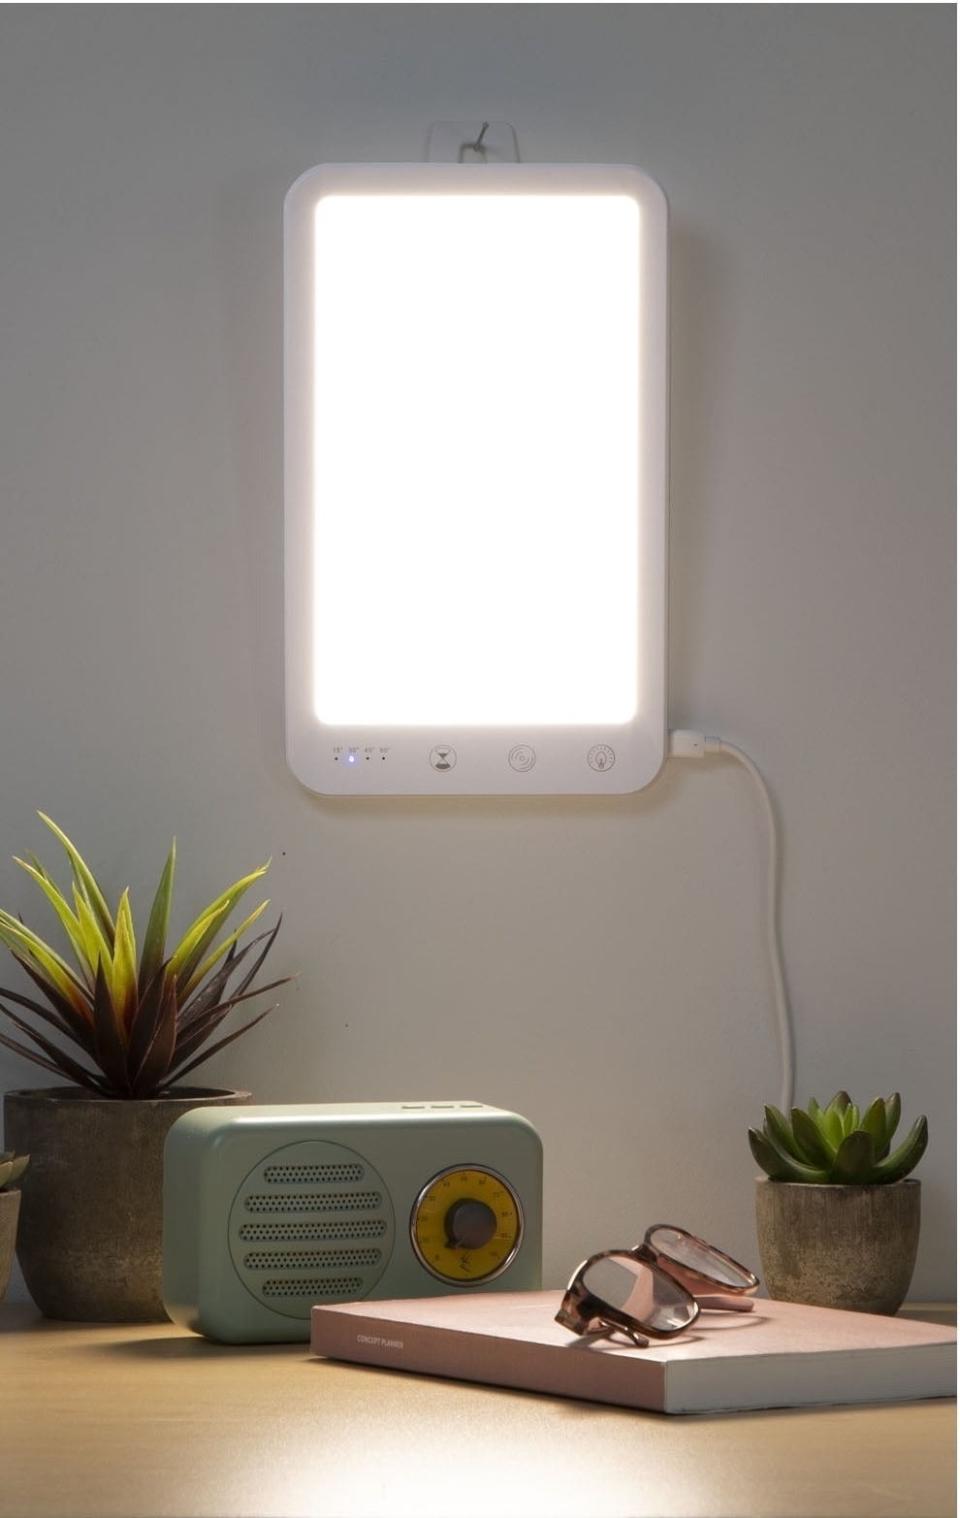 Therapy lamp hangs on a wall